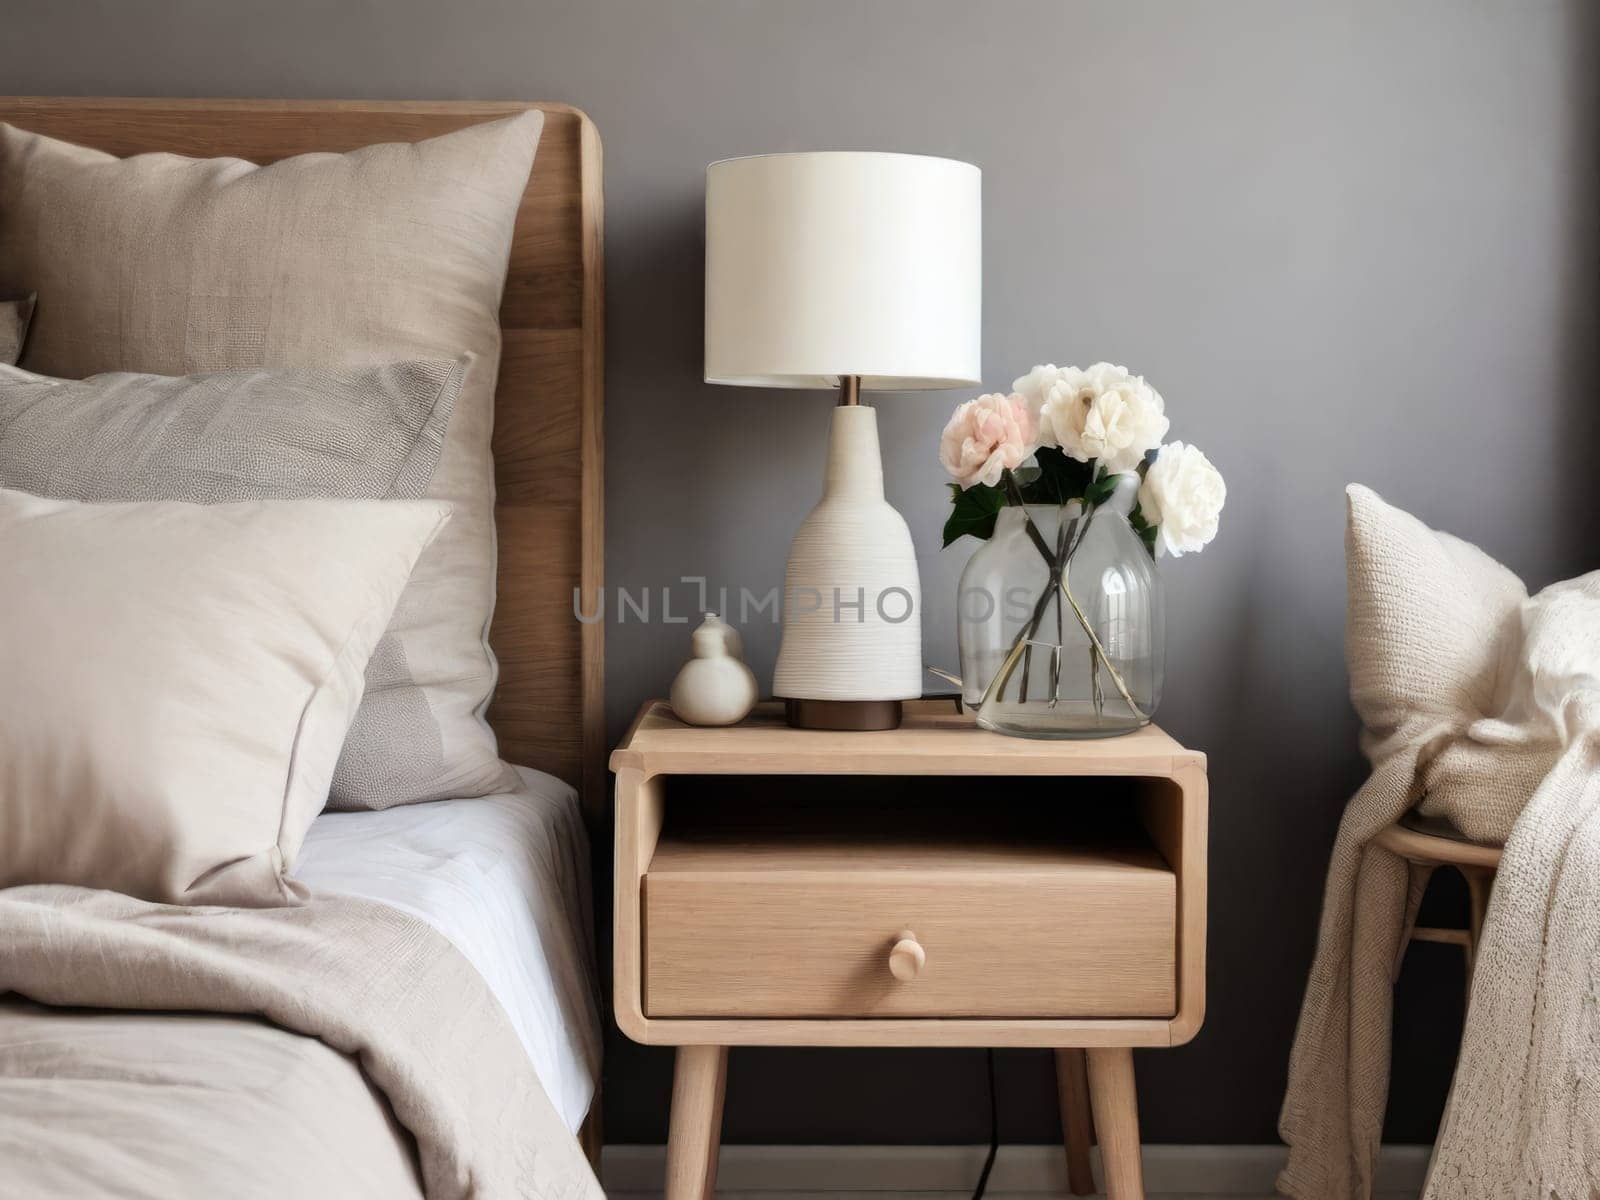 Nightstand with lamp and flowers in the bedroom. Home interior in Scandinavian style.